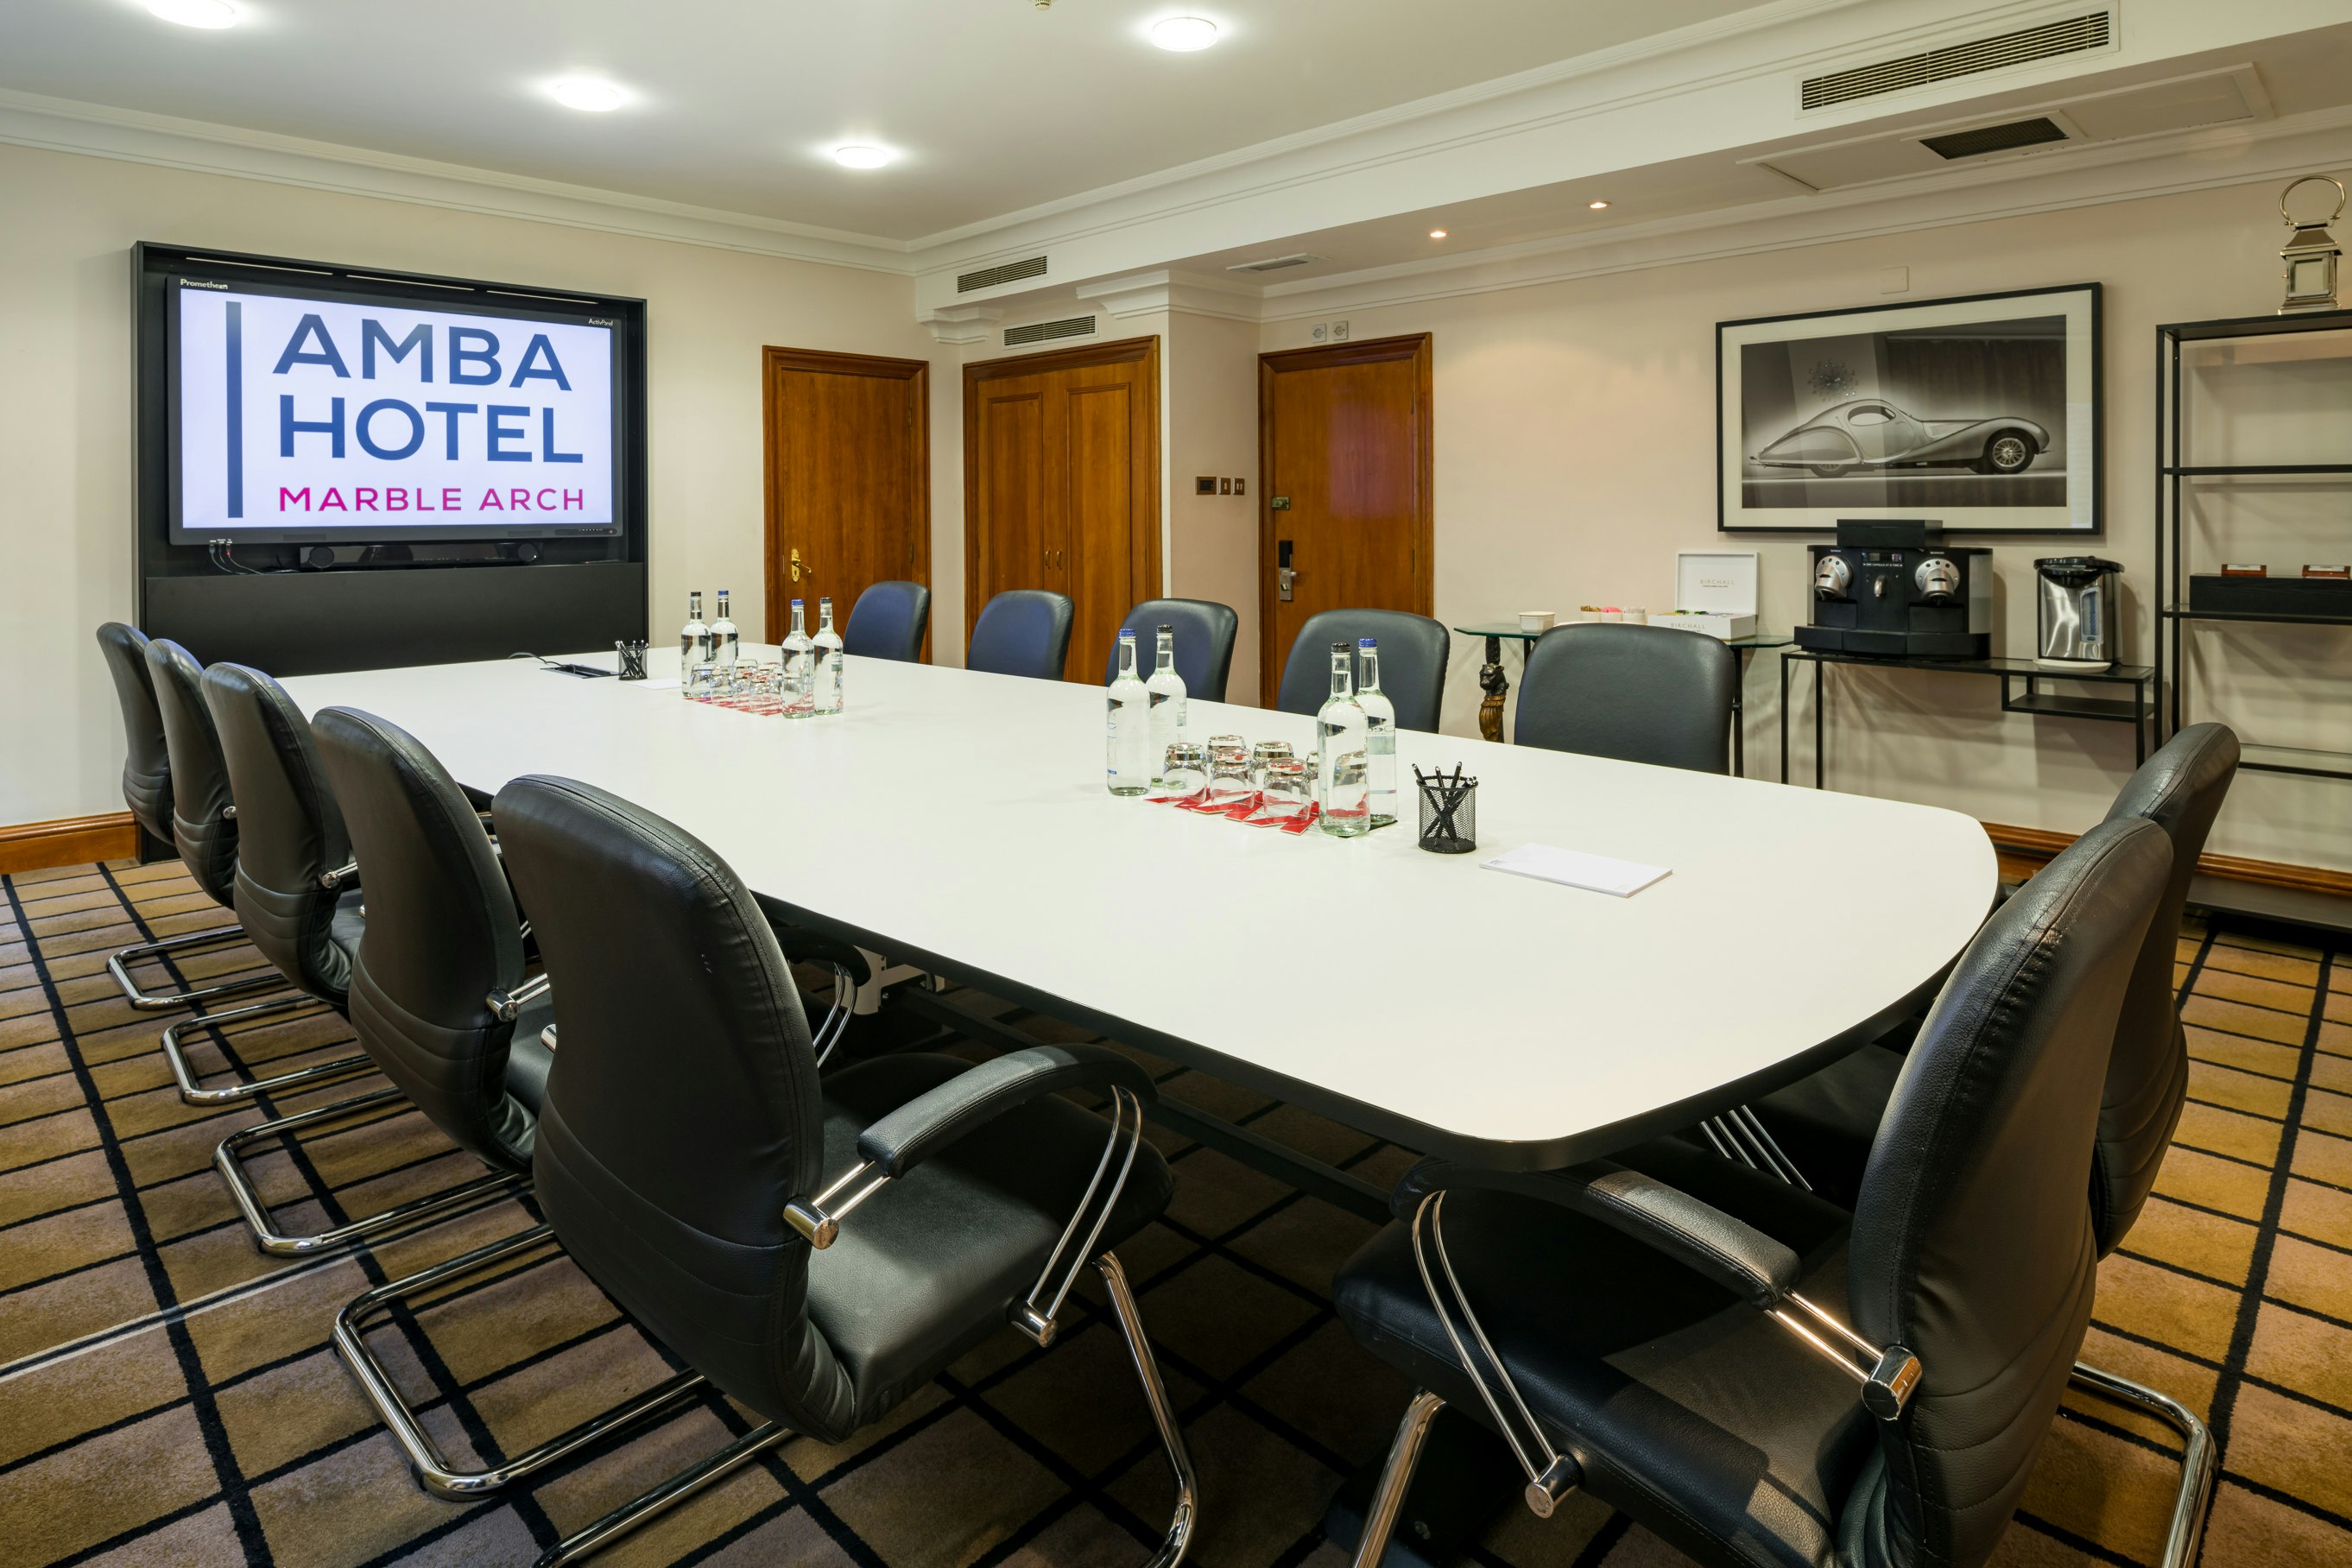 Amba Hotel Marble Arch - Westminster image 1